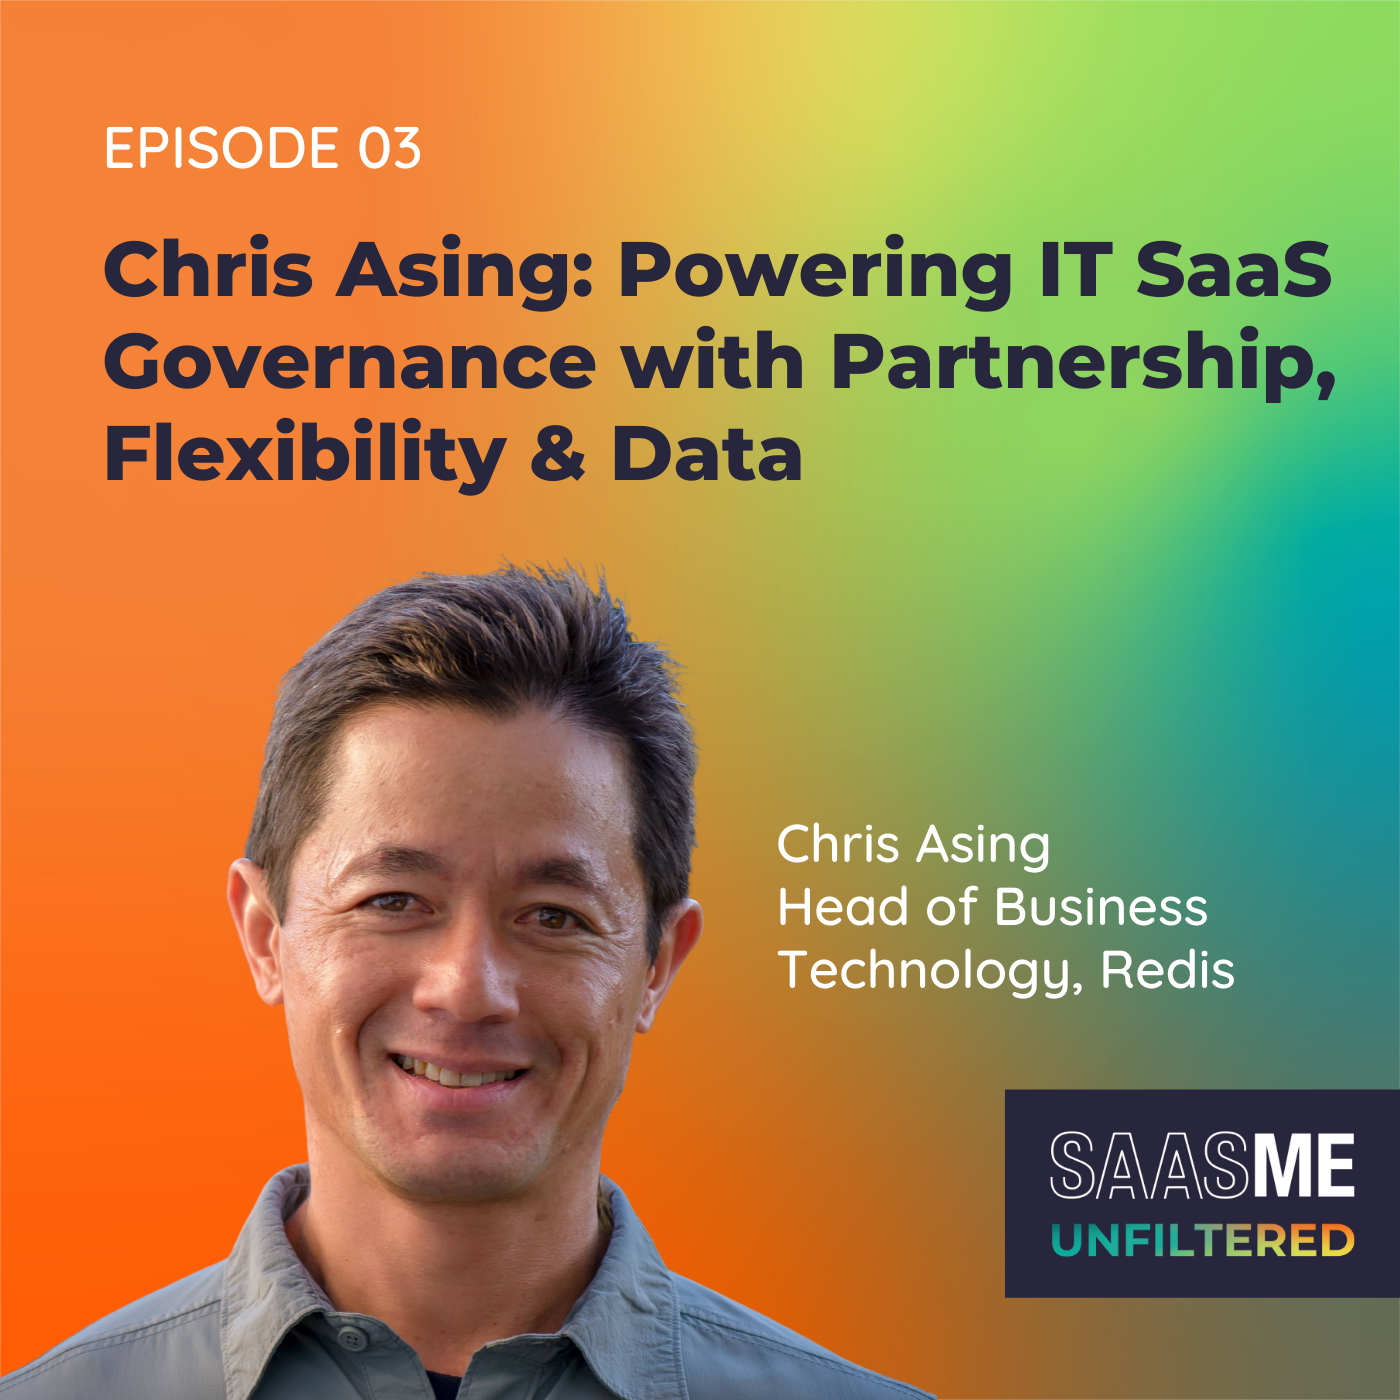 Chris Asing: Powering IT SaaS Governance with Partnership, Flexibility & Data